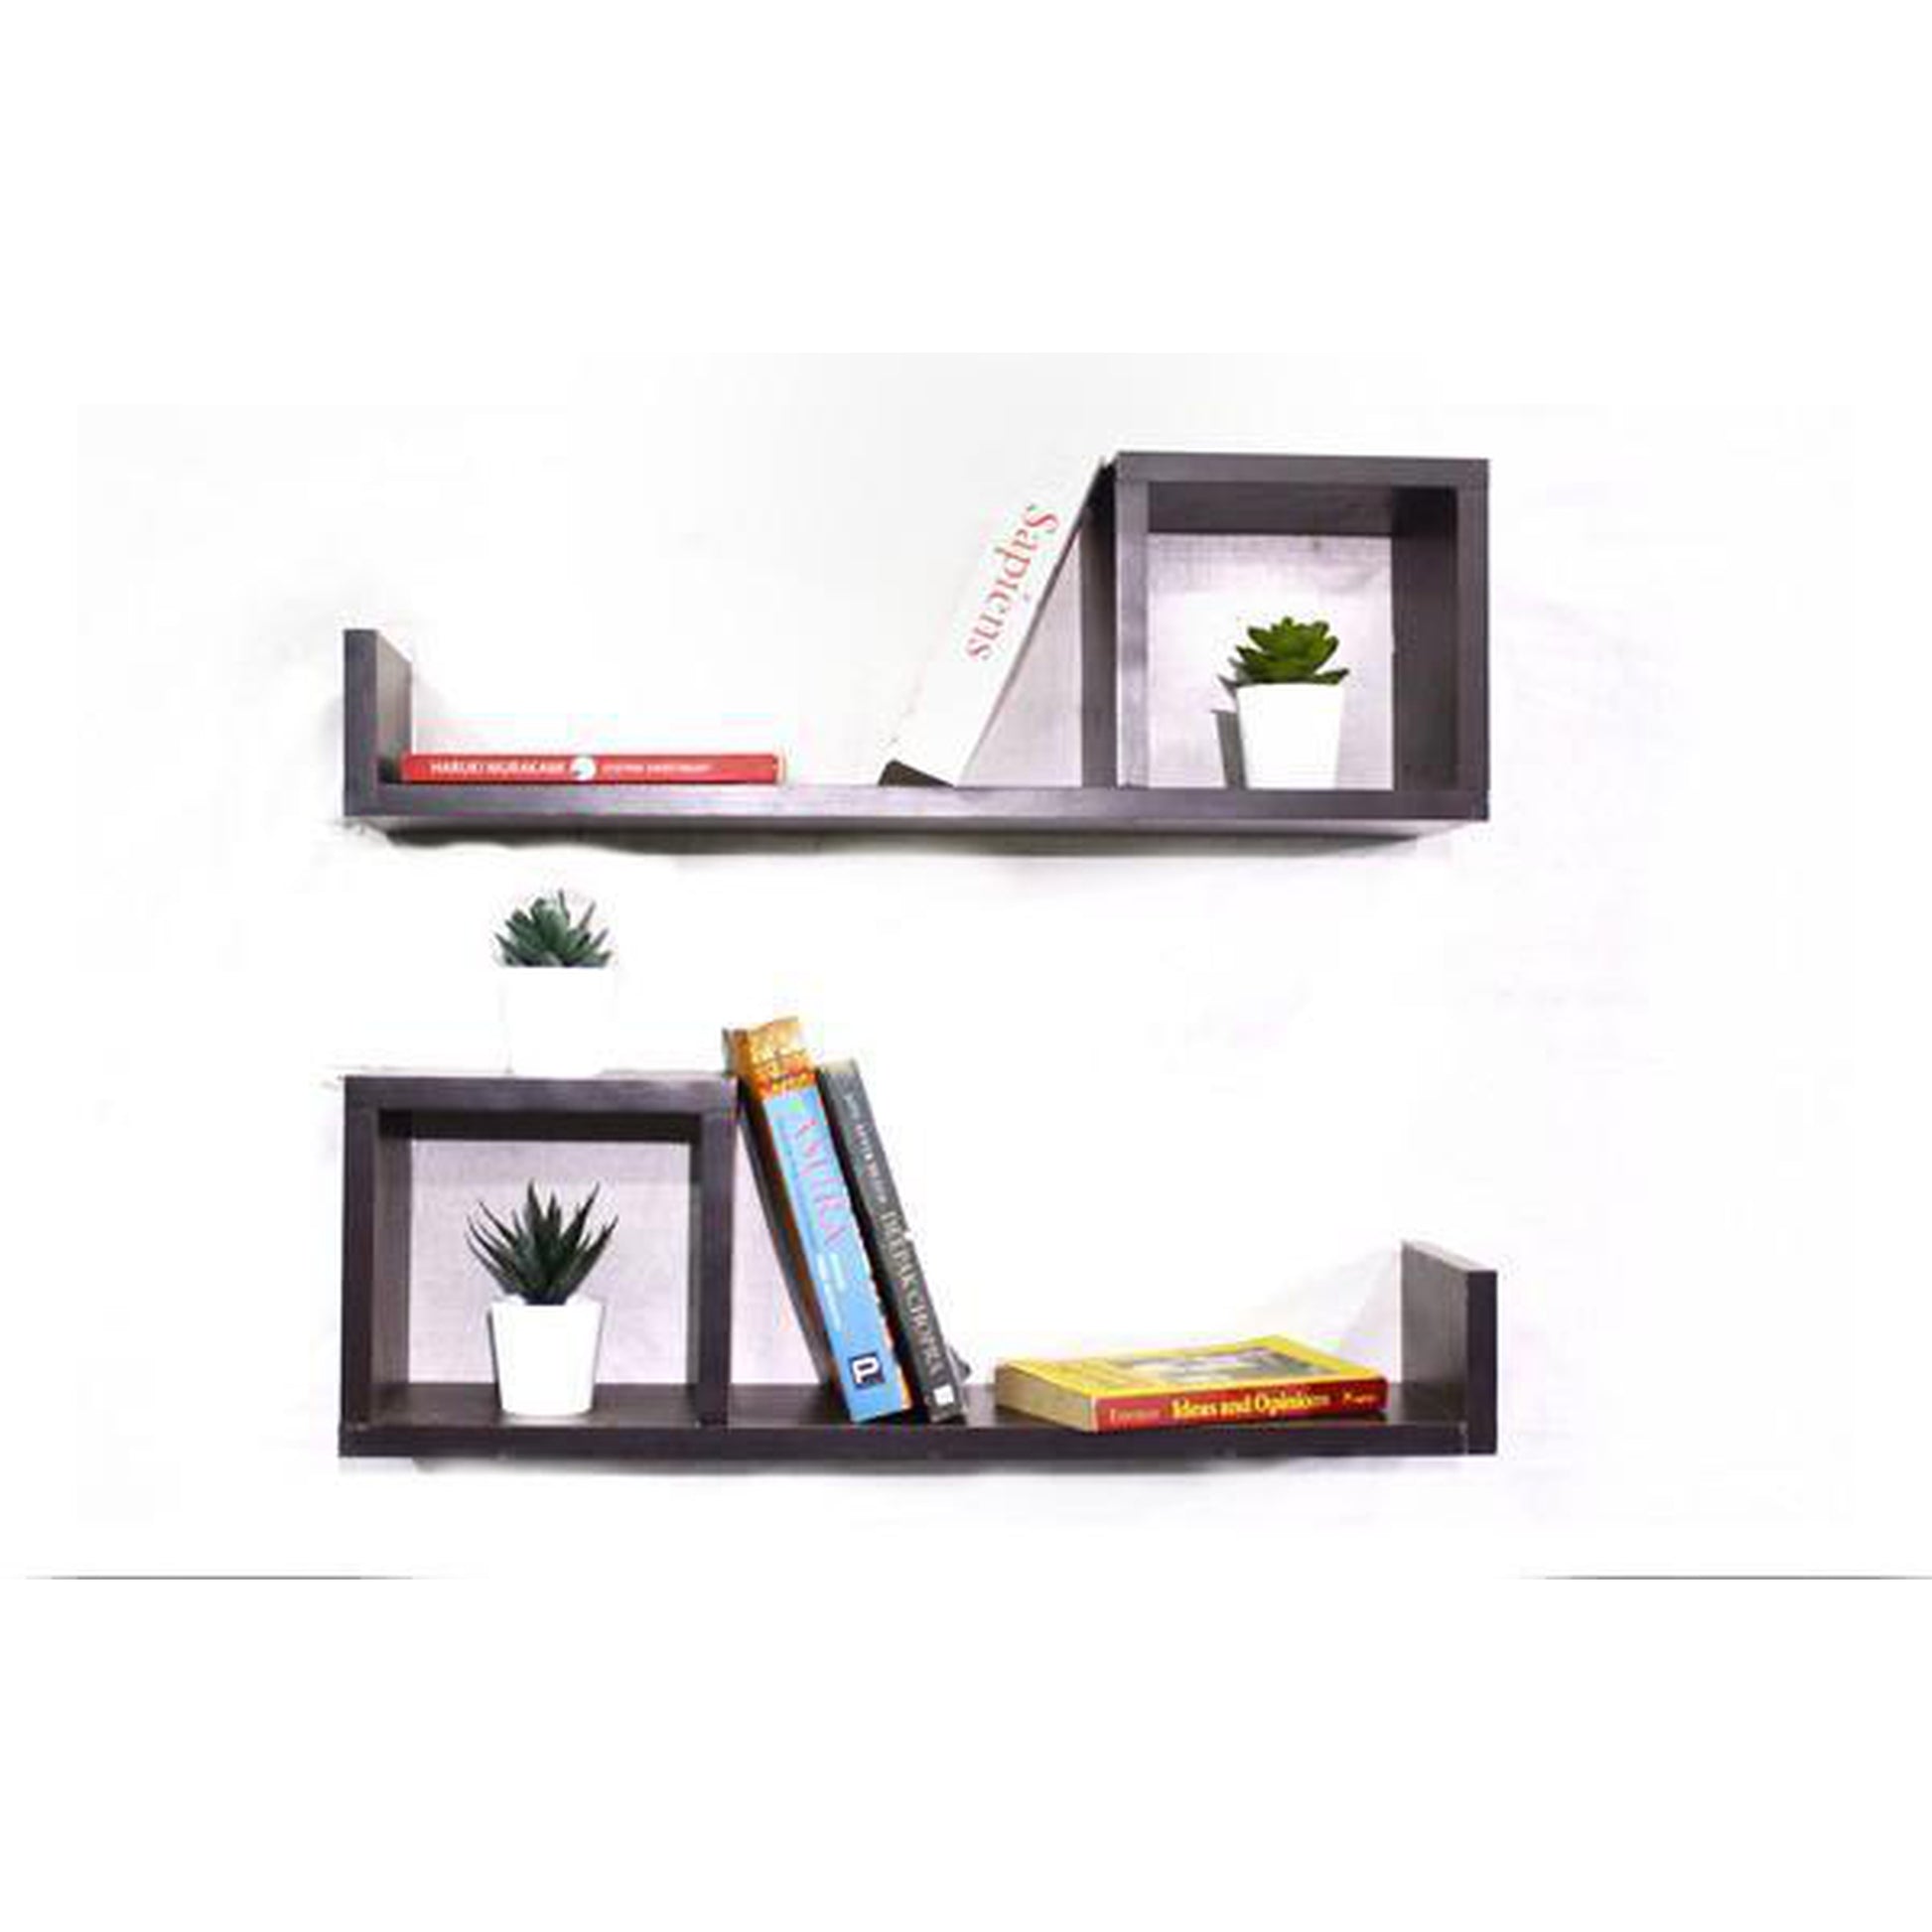 Wooden bookshelves set of two - The Teal Thread